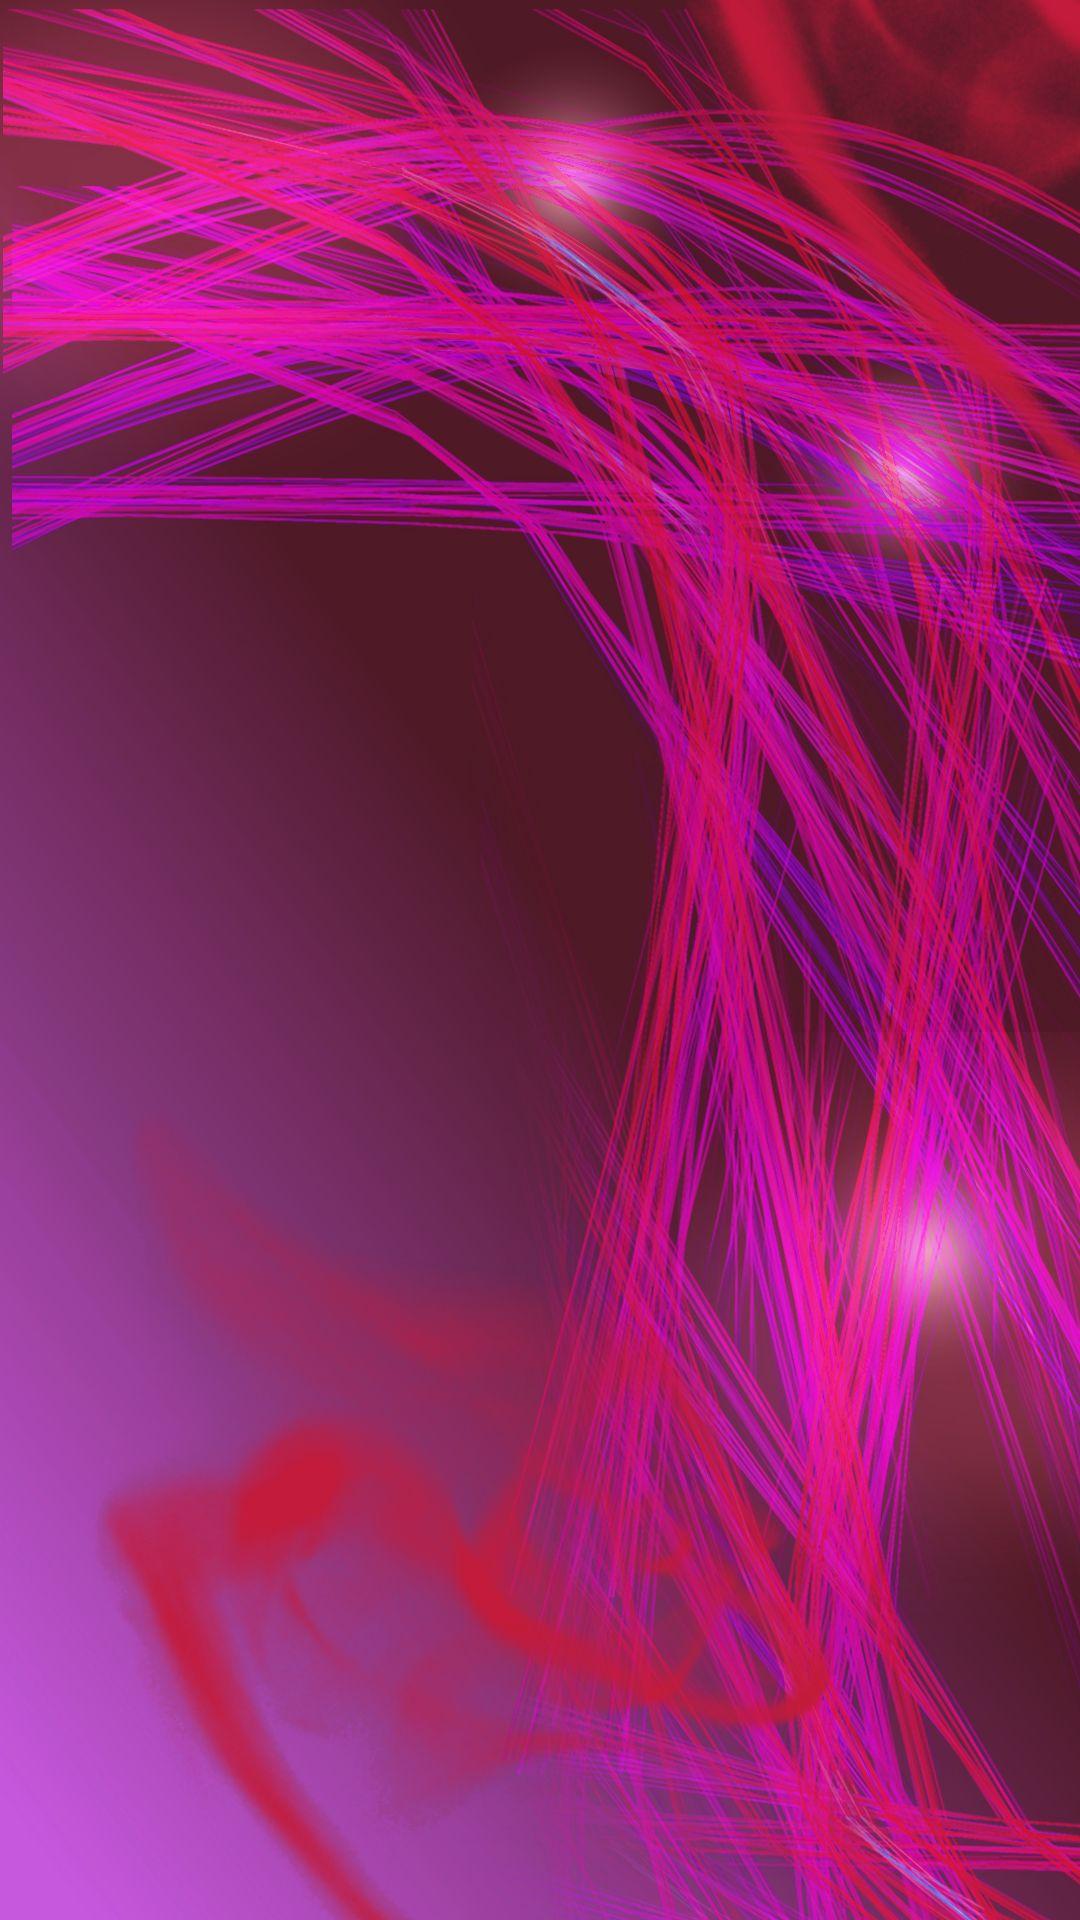 Abstract Vivid Reds And Violets Gradient #wallpaper, 1080*1820 9 16